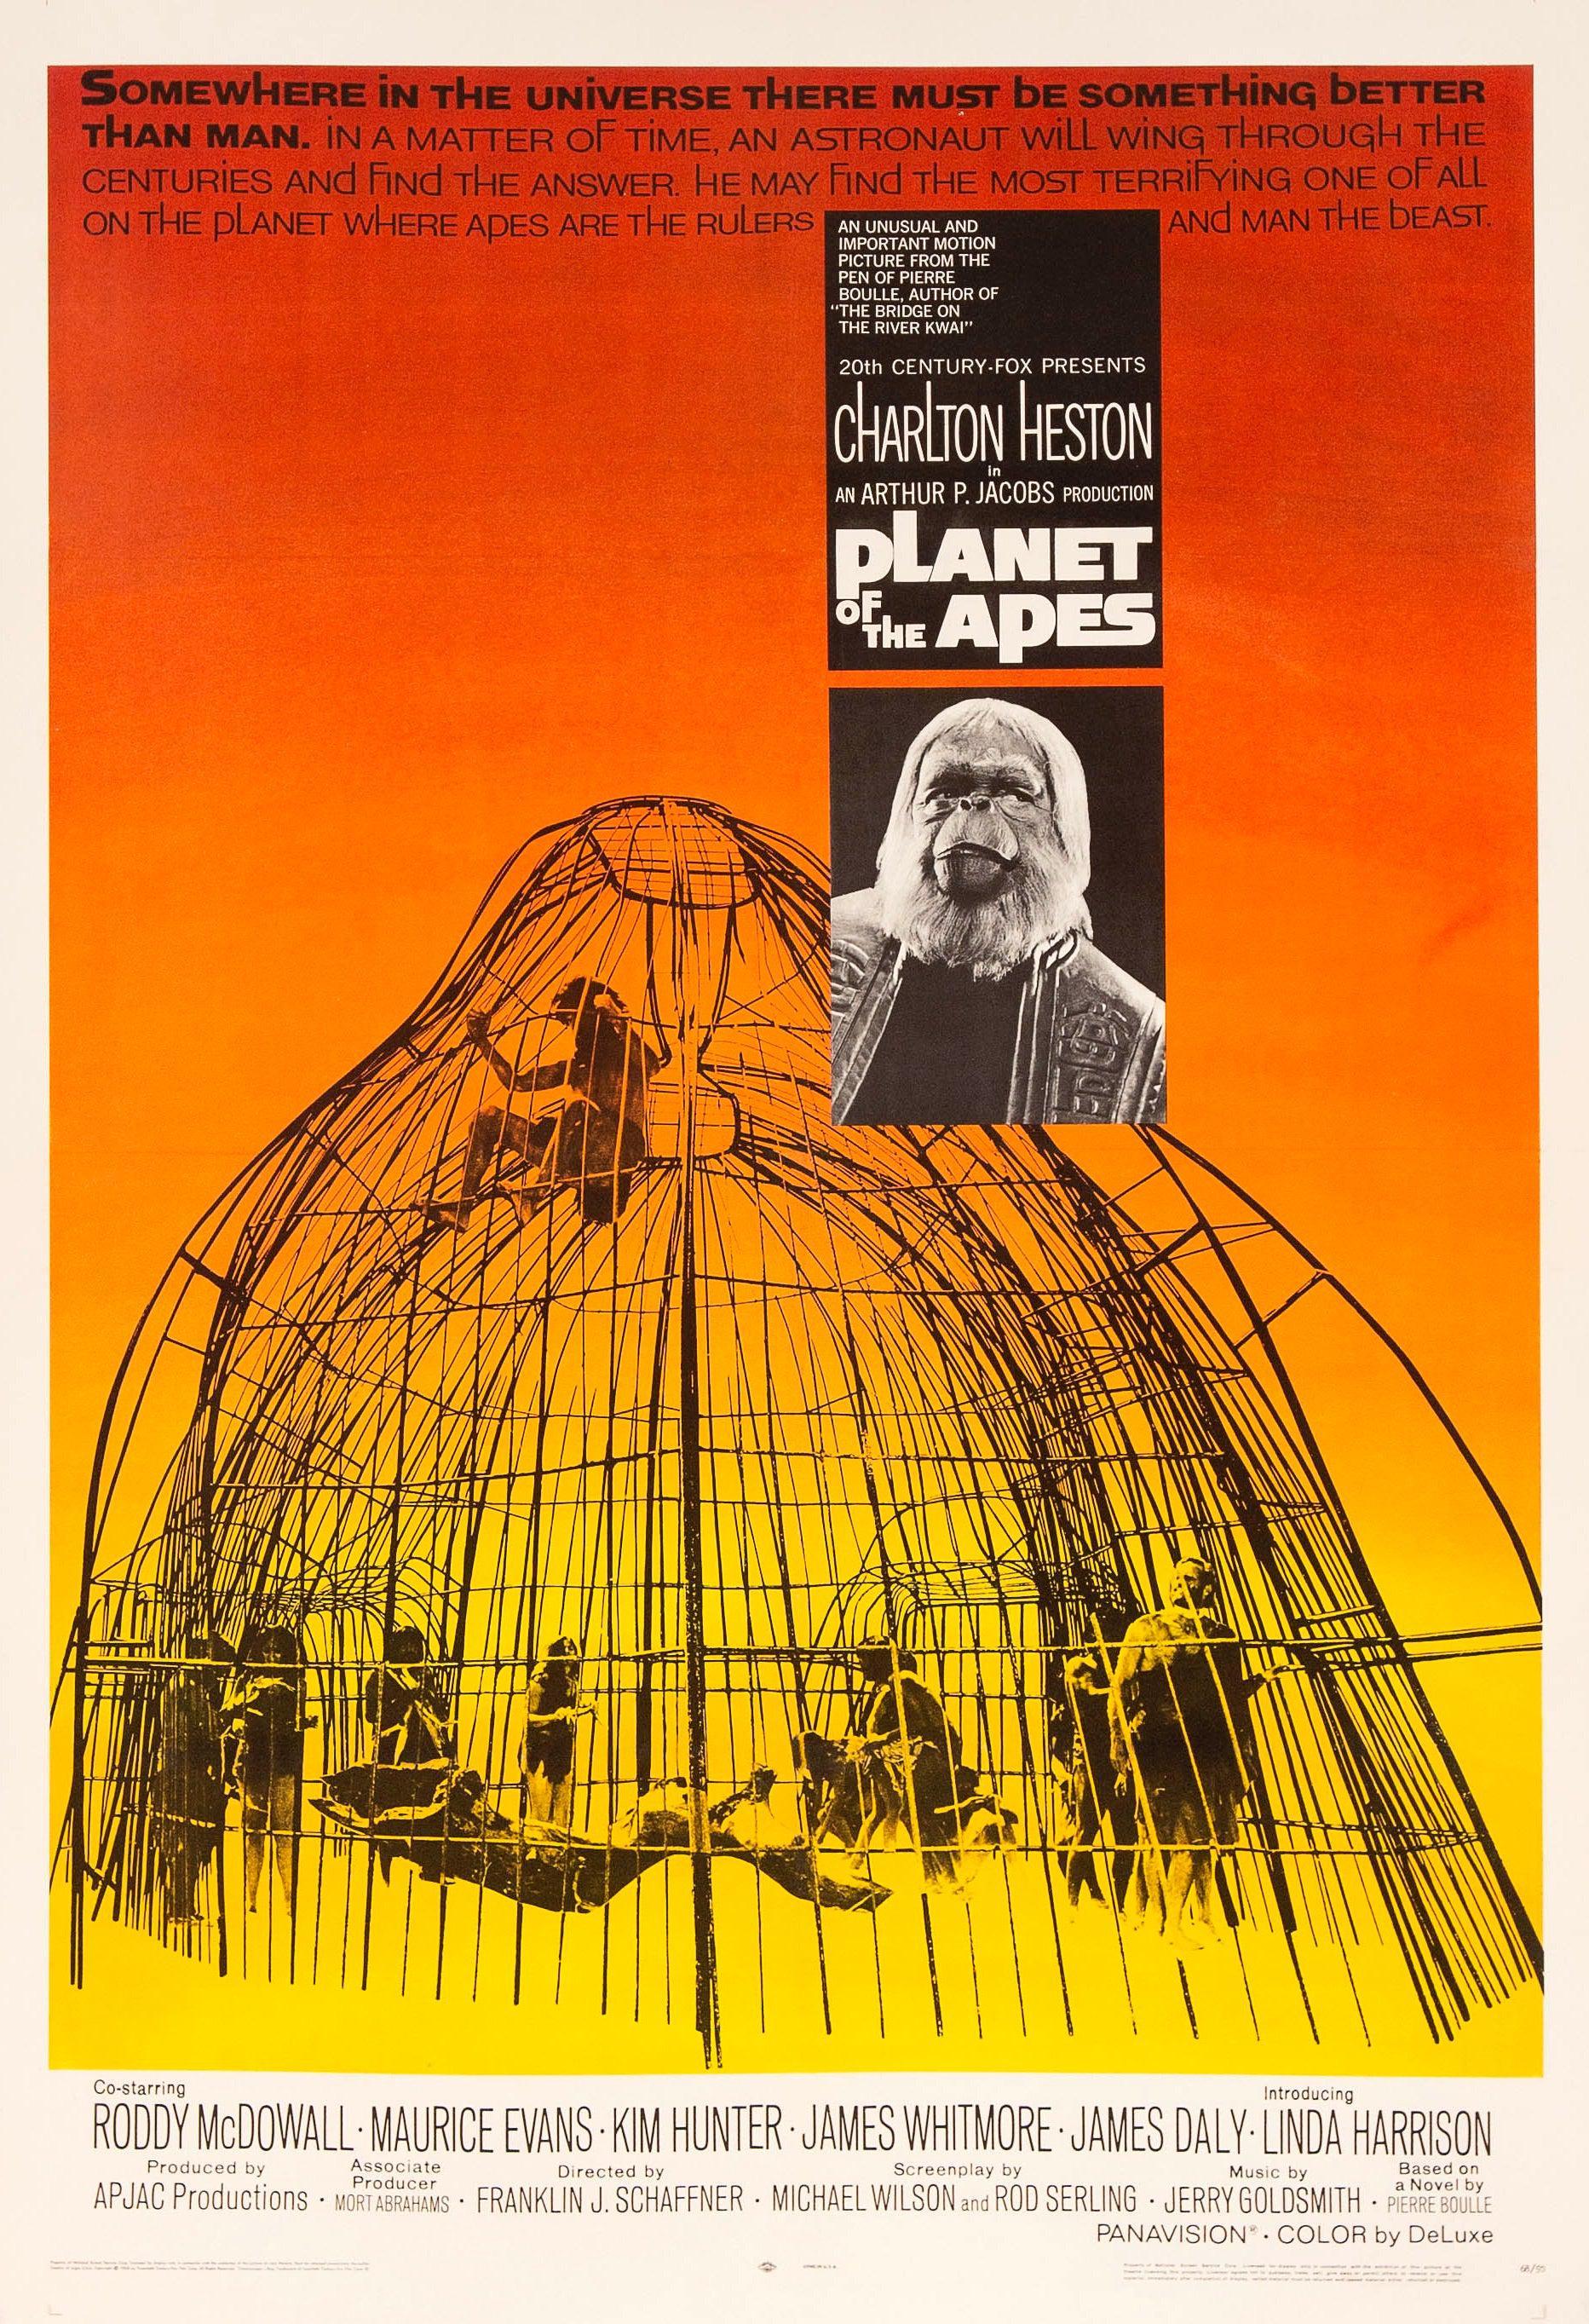 Planet of the Apes 1 Sheet (27x41) Original Vintage Movie Poster